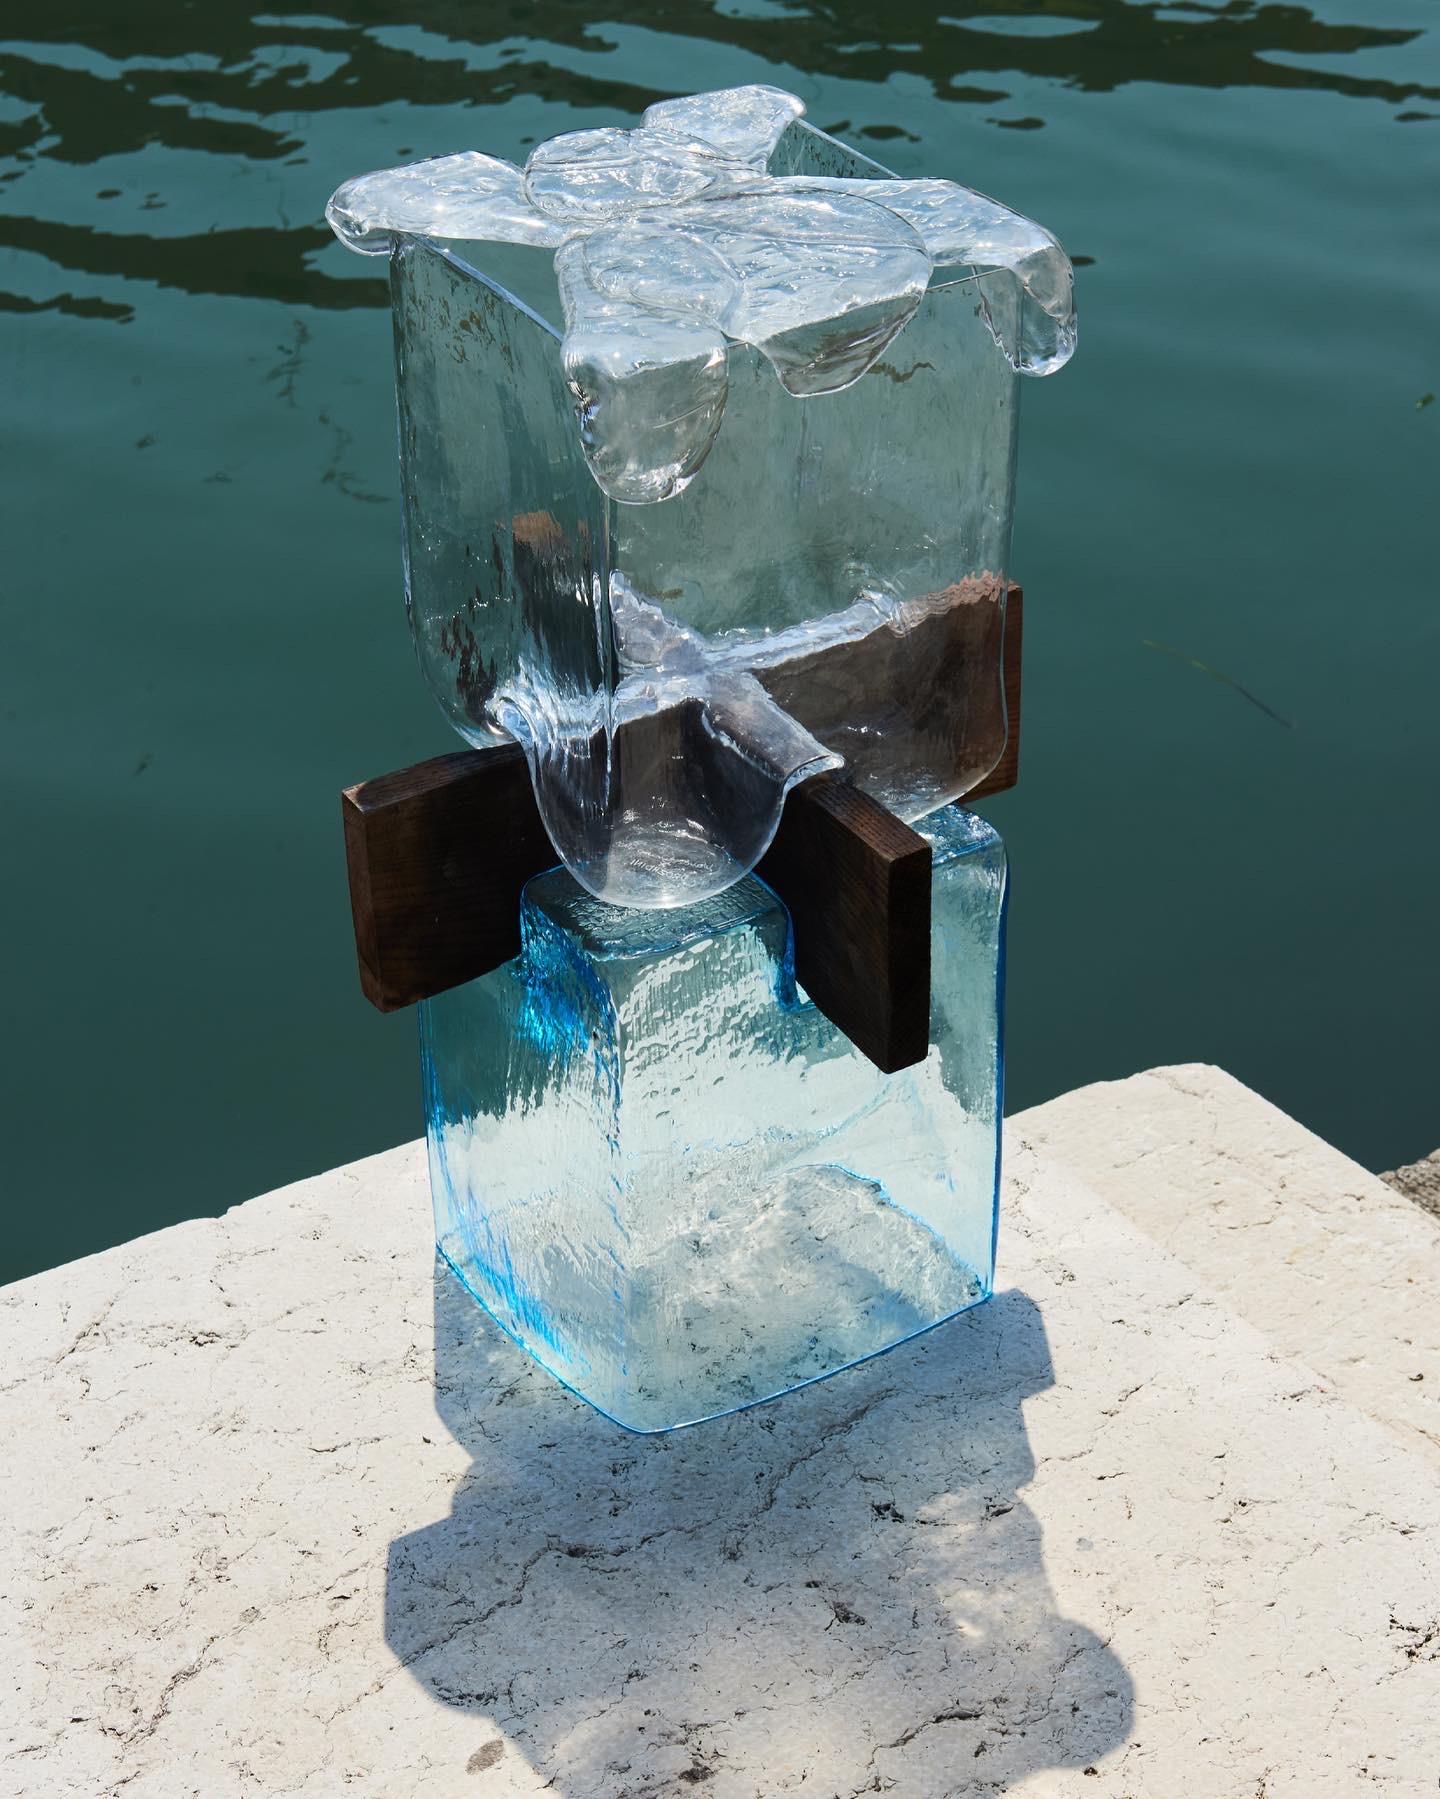 Venice Collection vase by Alexey Drozhdin
Dimensions: D 25 x W 25 x H 72 cm. 
Materials: glass, oak shape.

A young designer and artist Alexey Drozhdin creates extraordinary decorative glass objects. the designer became a finalist of the